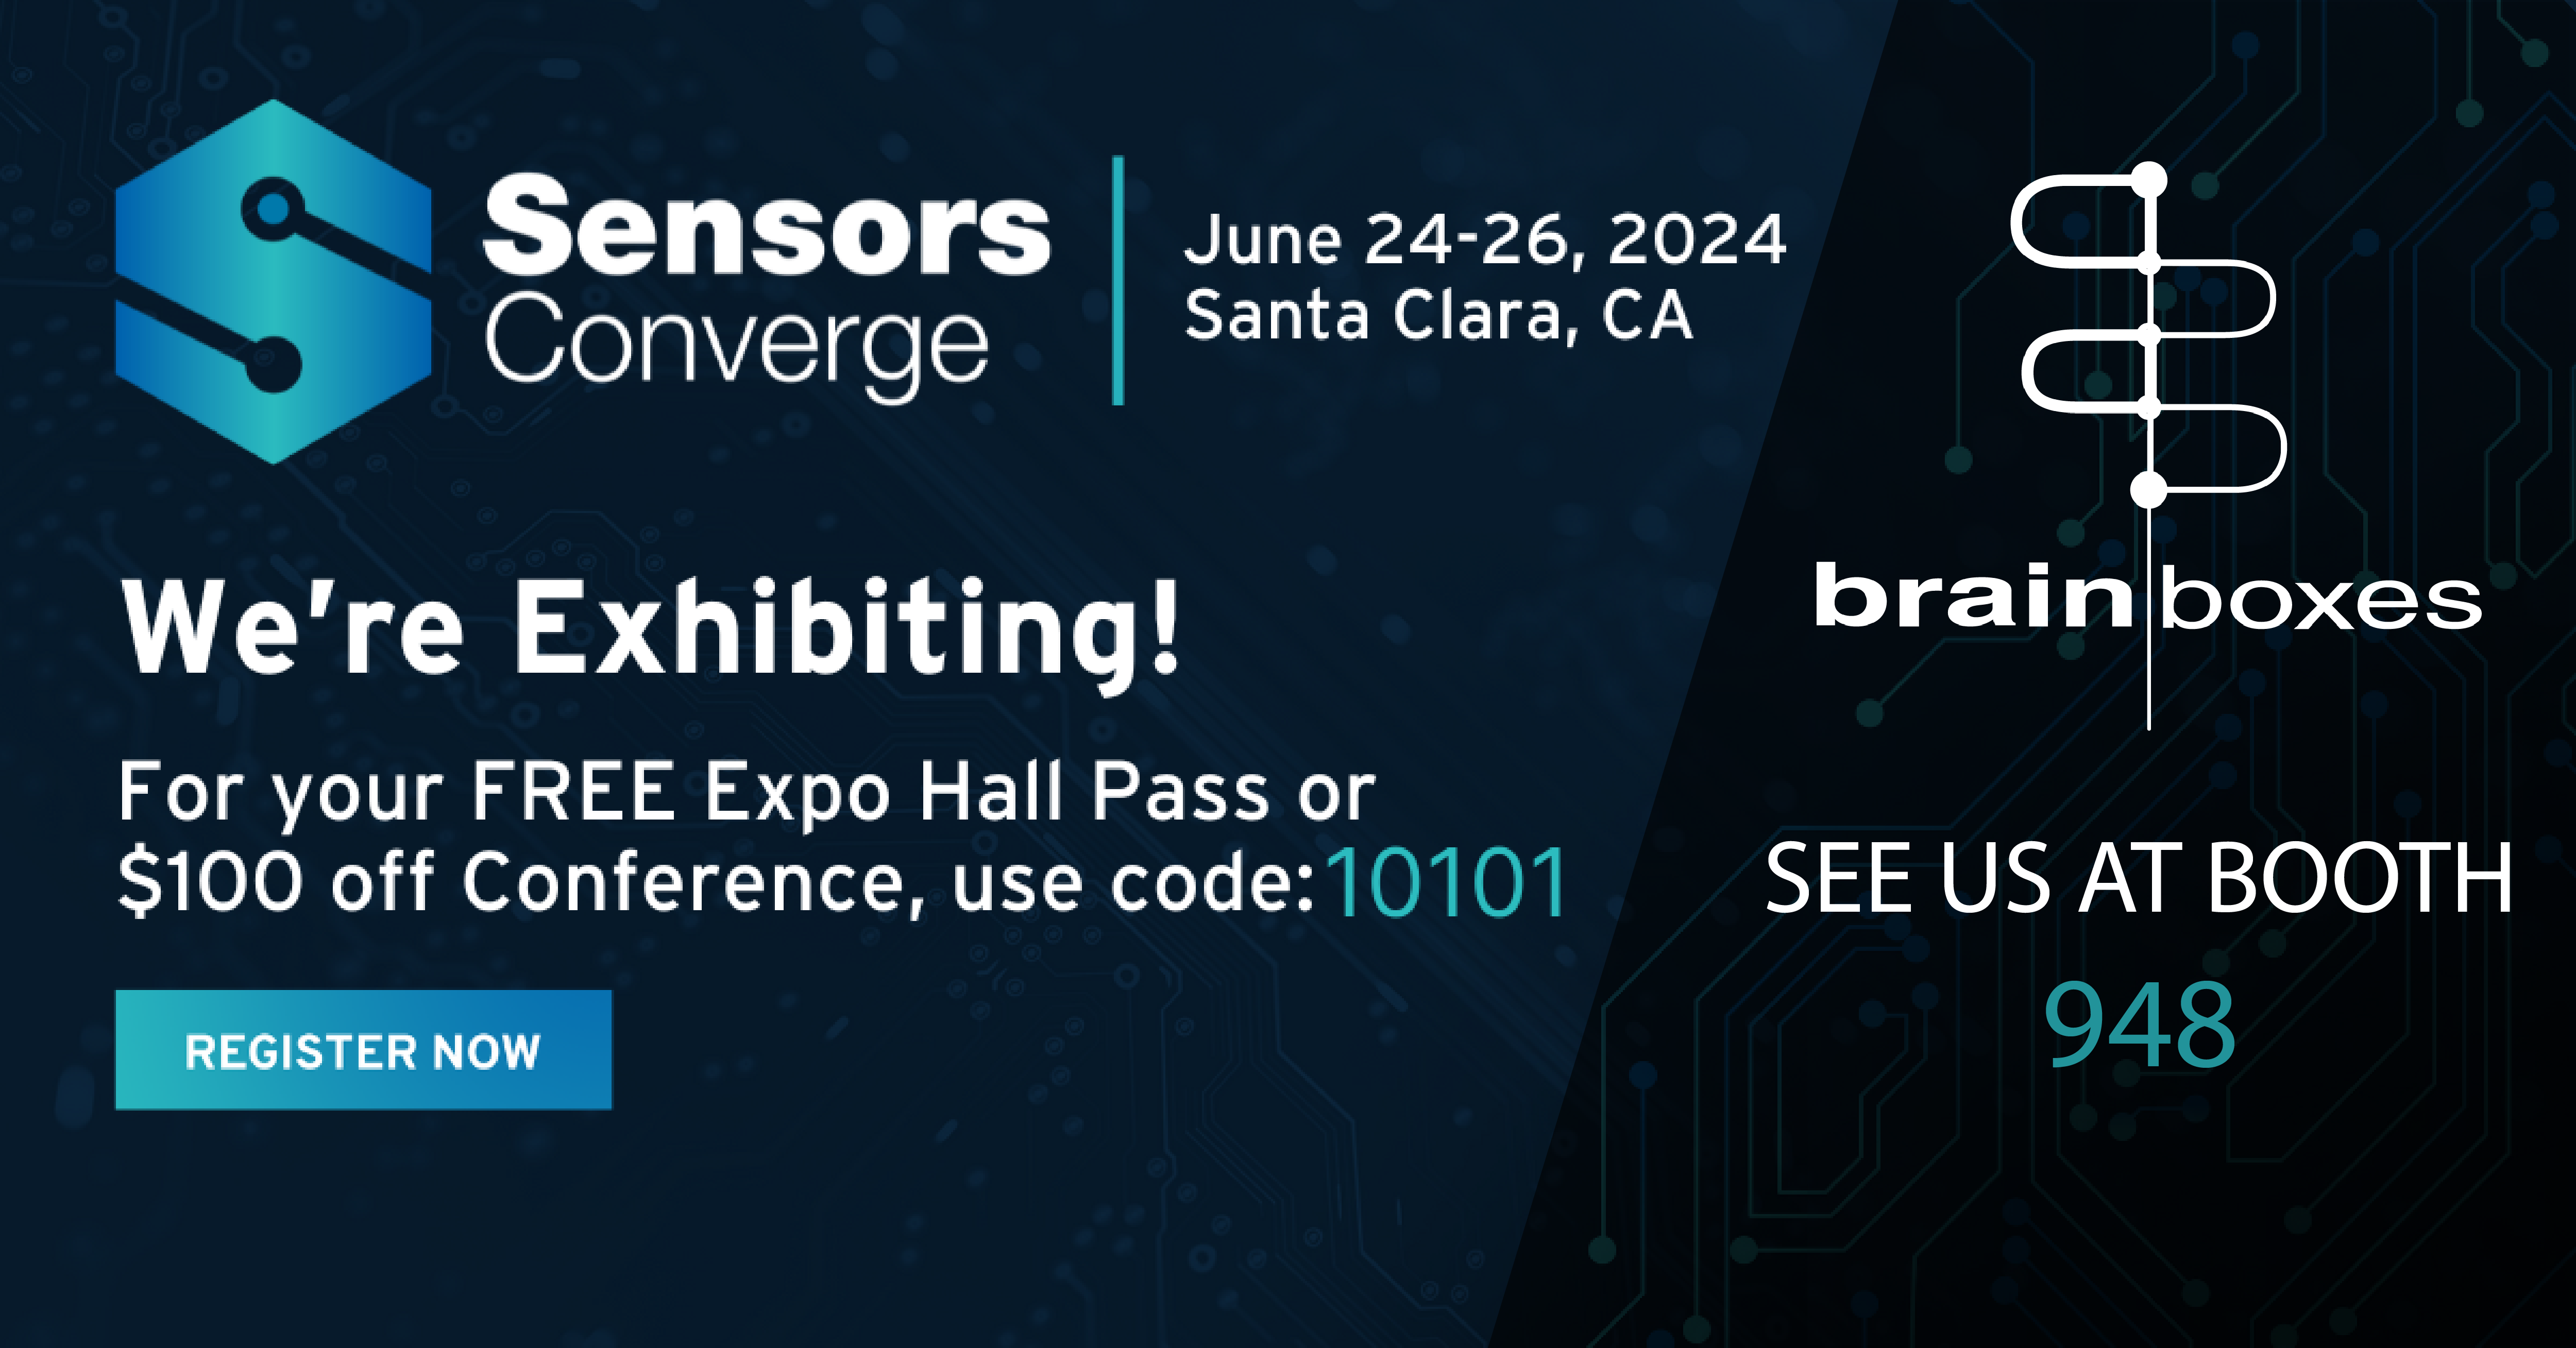 Featured image for “SENSORS CONVERGE 2024: Meet us at the Santa Clara Convention Center!”